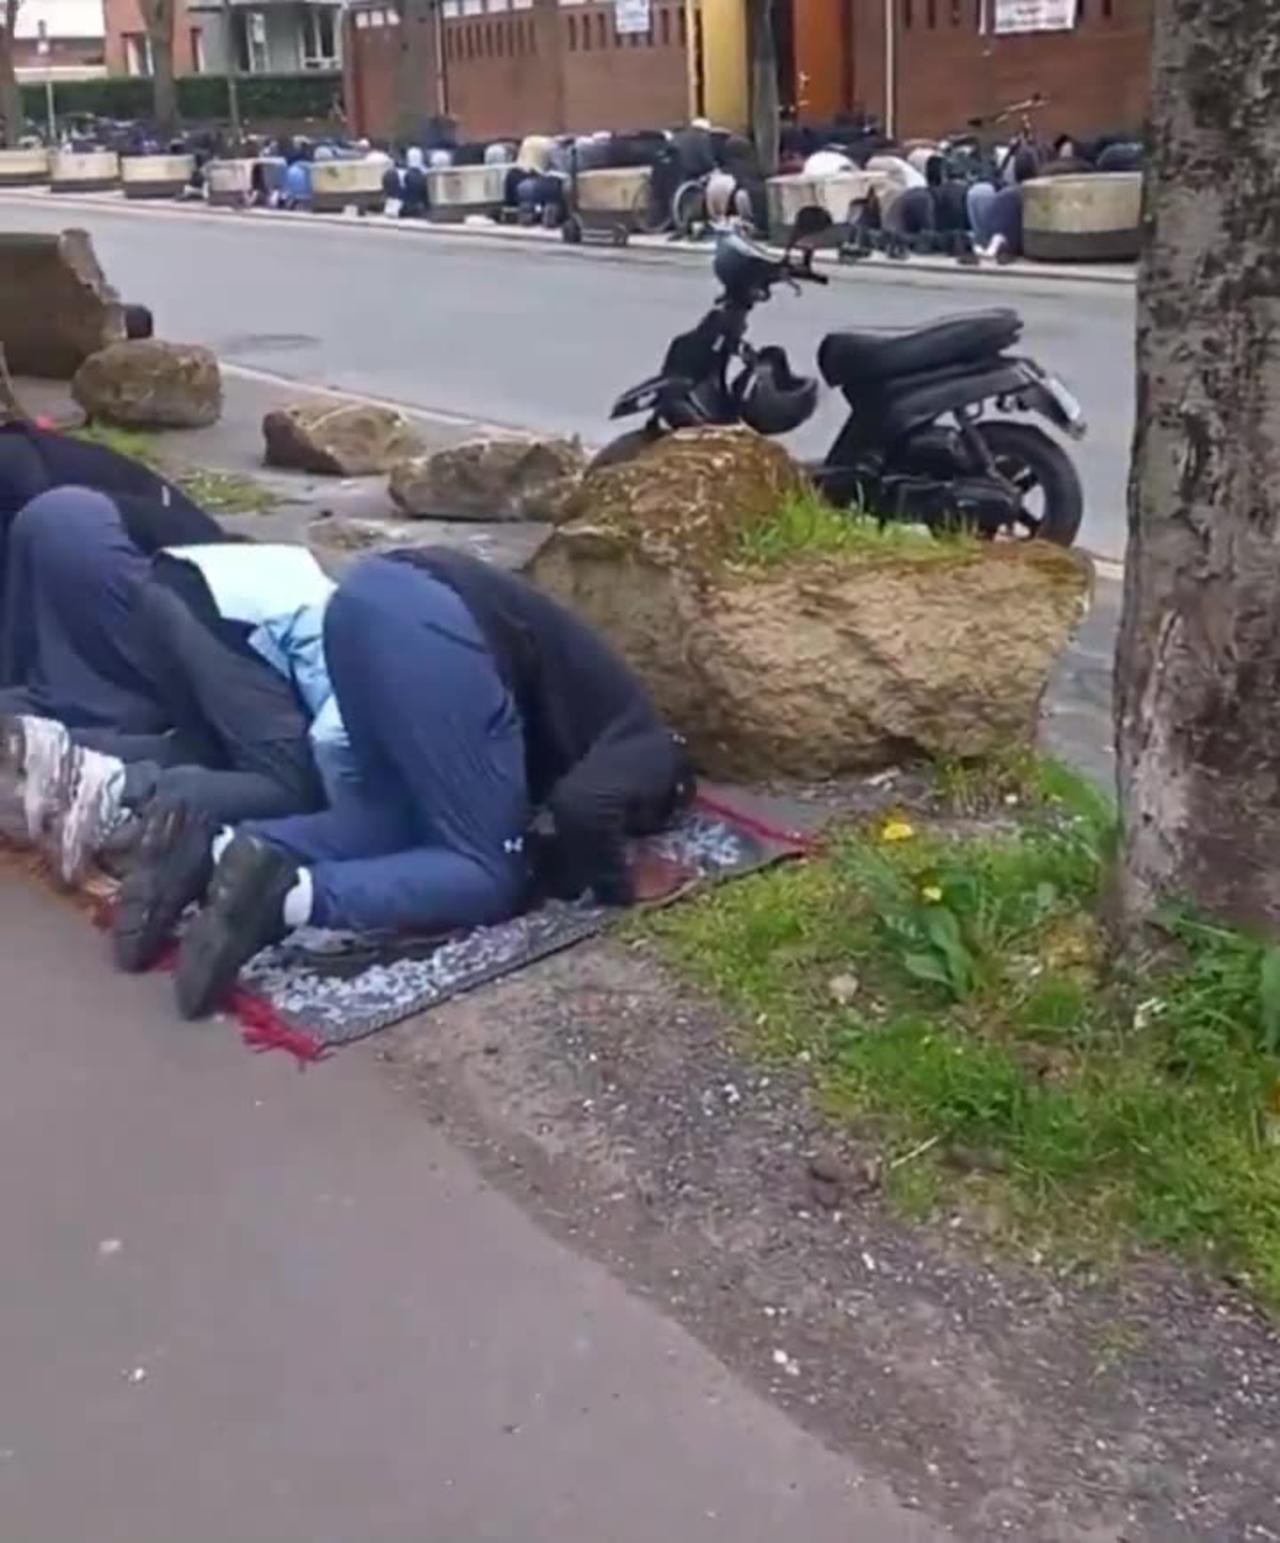 This is Paris. Macron's France has been conquered but perhaps he doesn't know